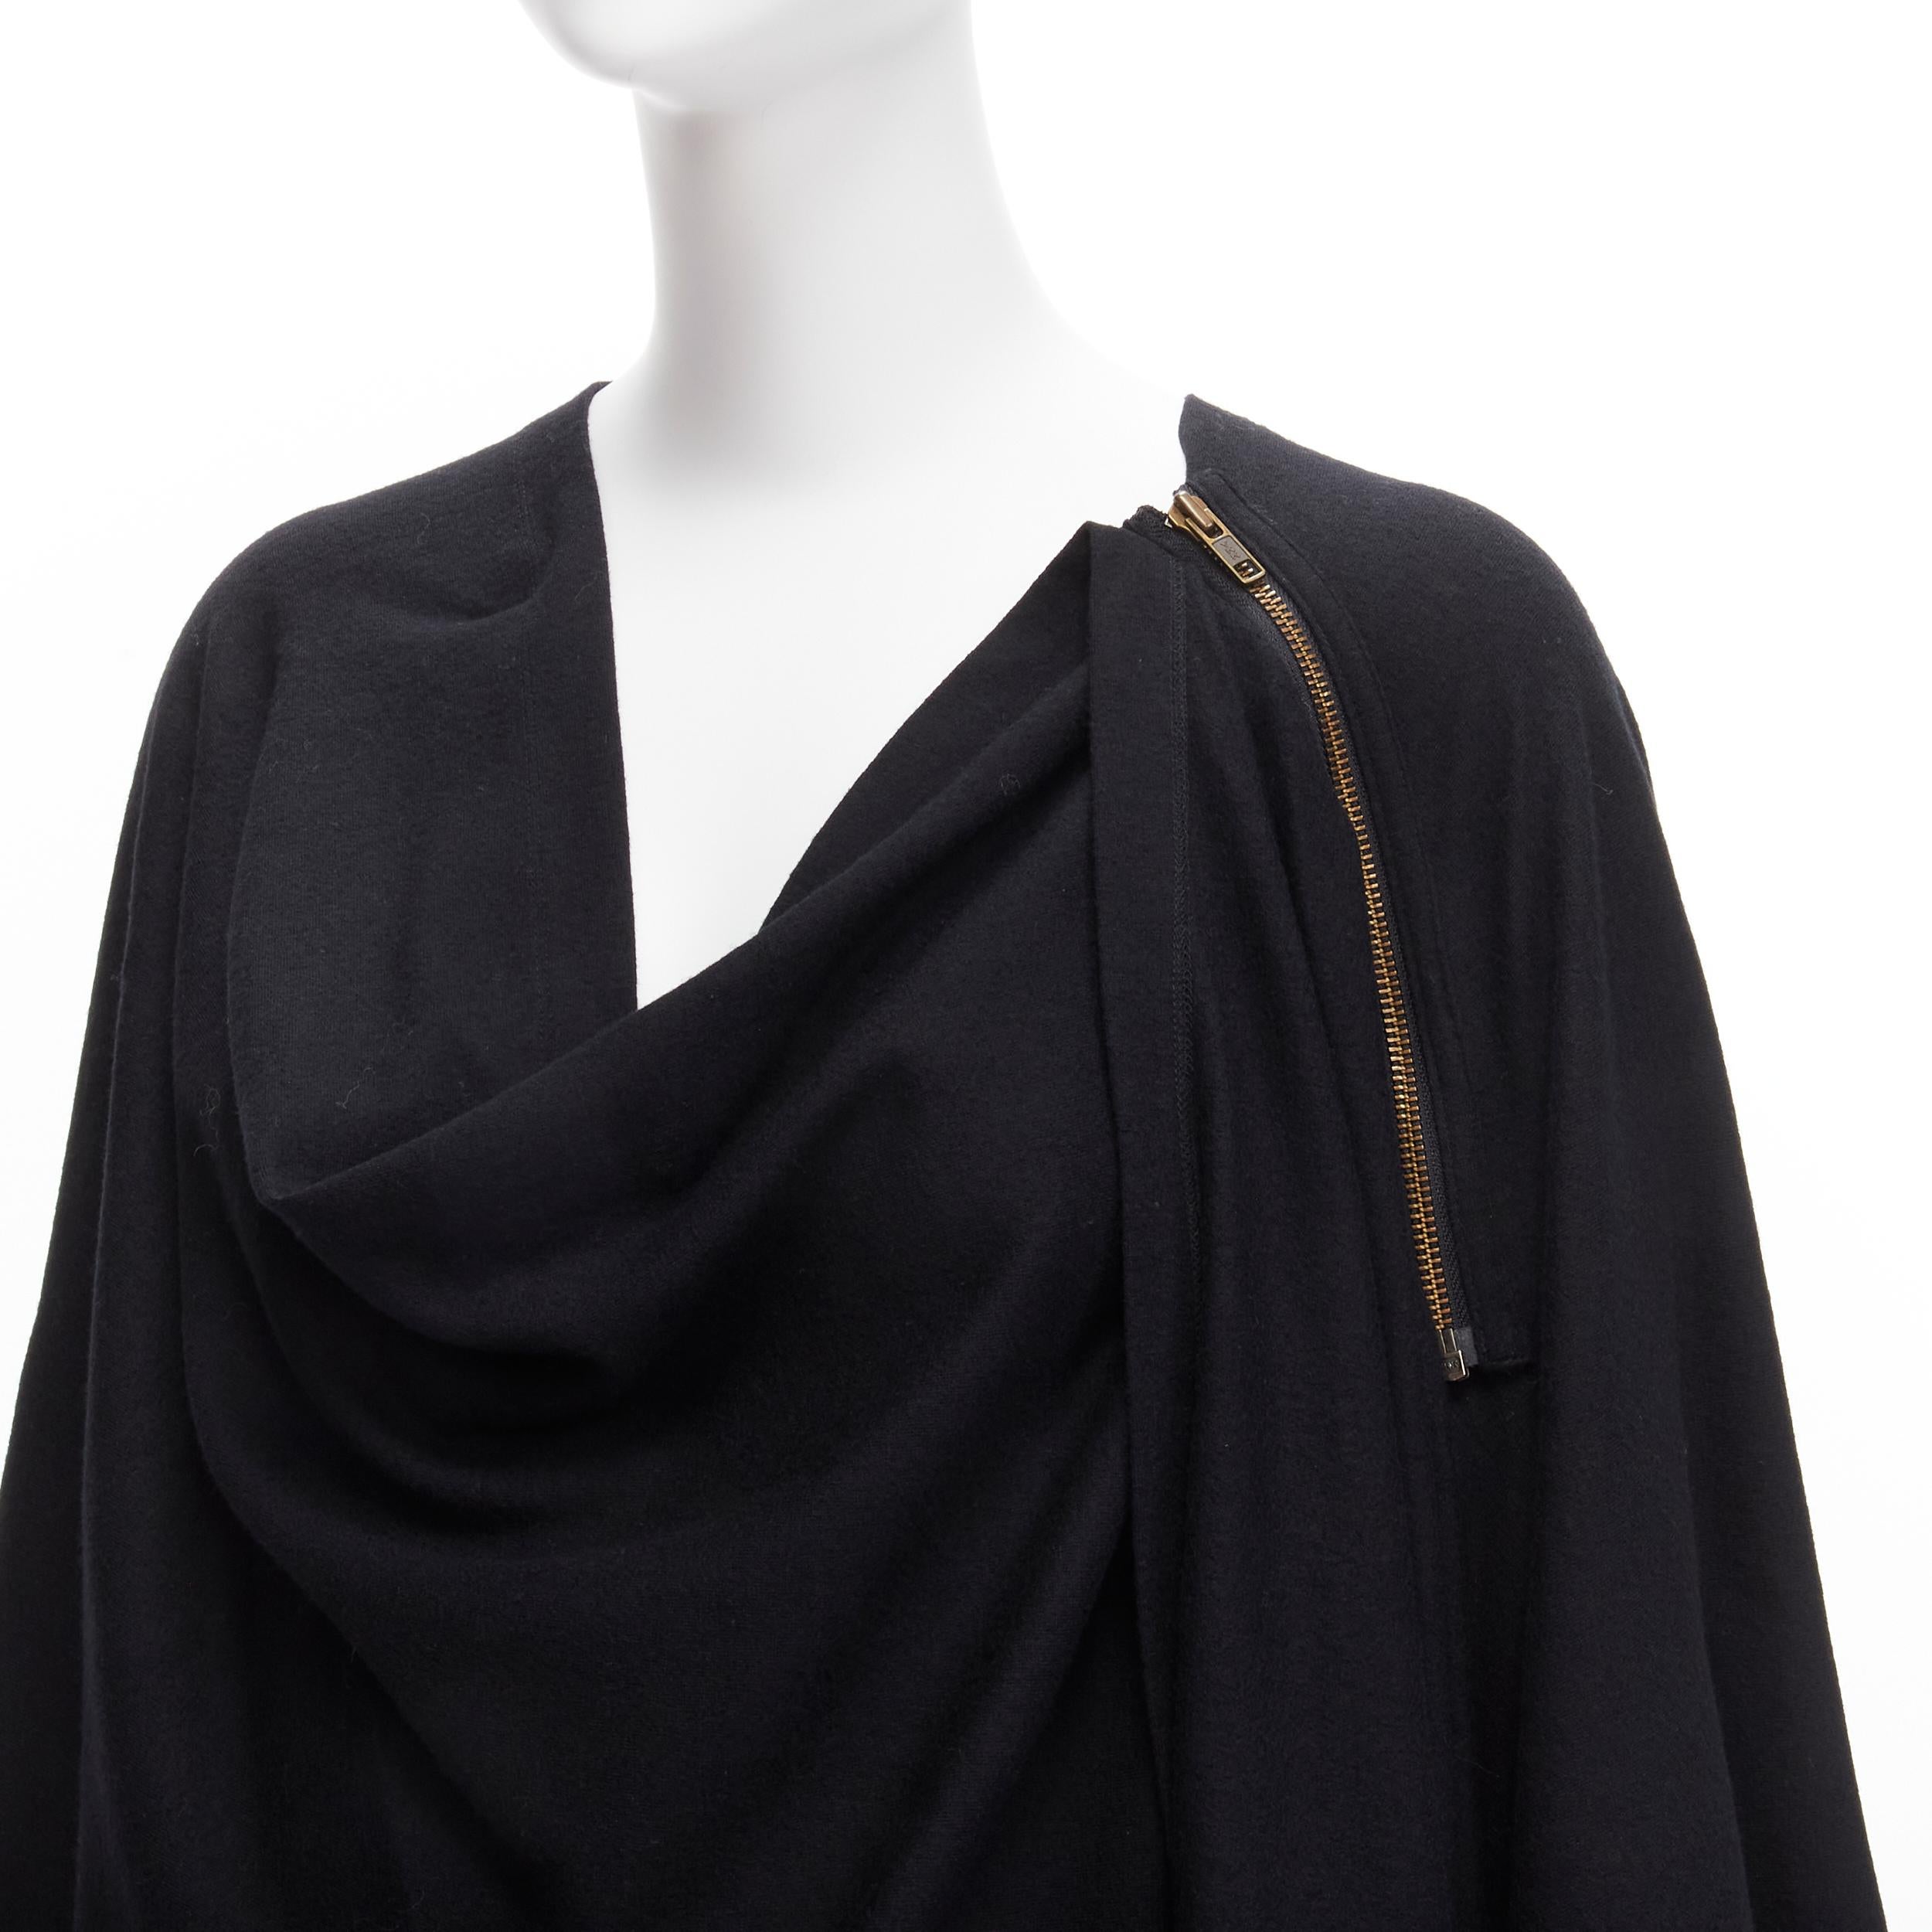 ISSEY MIYAKE 1980s Vintage black wool side zip draped cowl neck coat JP9

Reference: TGAS/D00175
Brand: Issey Miyake
Collection: 1980s
Material: Wool
Color: Black
Pattern: Solid
Closure: Zip
Extra Details: Can be worn with zipper undone for a